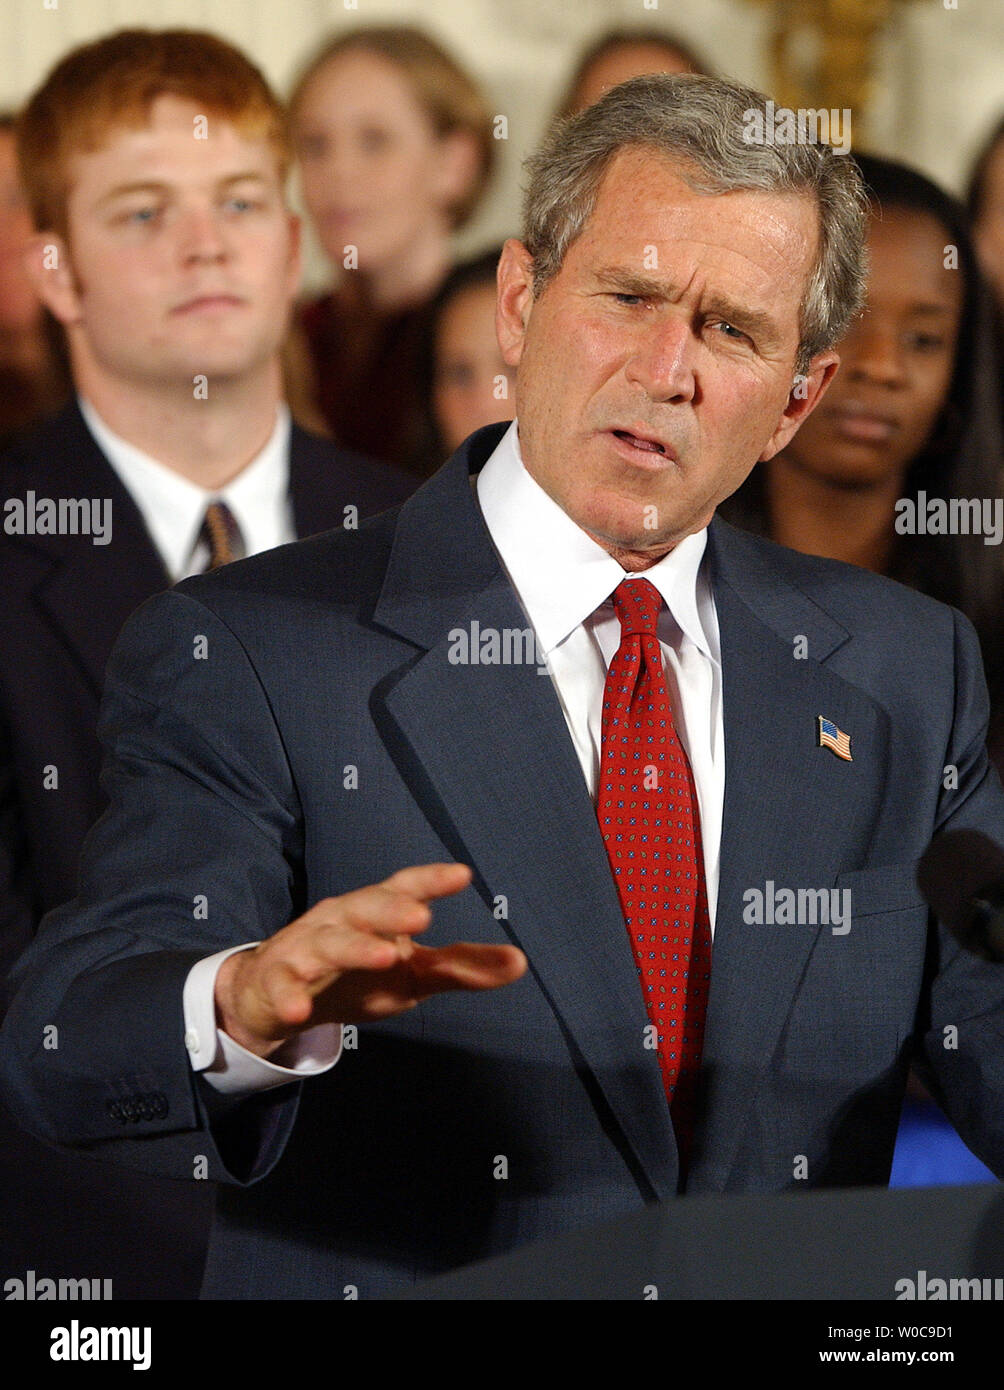 President George W. Bush  gestures during a ceremony honoring NCAA champion teams in the East Room of the White House on November 17, 2003. Present were University of Illinois-Champaign Men's Tennis, University of Florida Women's Tennis, University of Virginia Men's Lacrosse, Princeton's Women's Lacrosse, Rice University Men's Baseball, UCLA Women's Softball, Clemson University Men's Golf, and University of Southern California Women's Golf.   (UPI Photo/Roger L. Wollenberg) Stock Photo